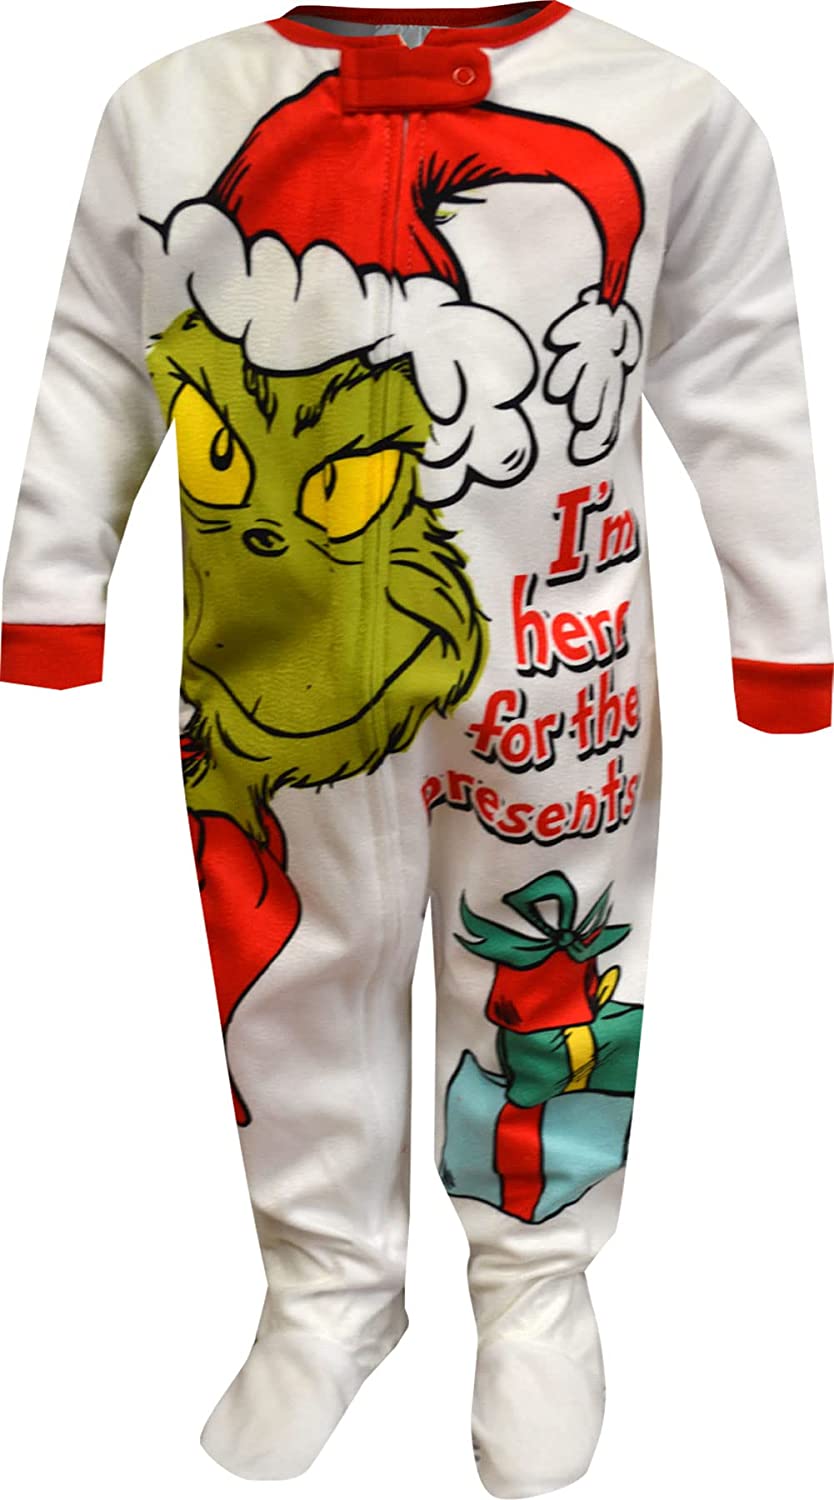 The Grinch Toddler Boys' One Piece Footsie Pajama Outfit